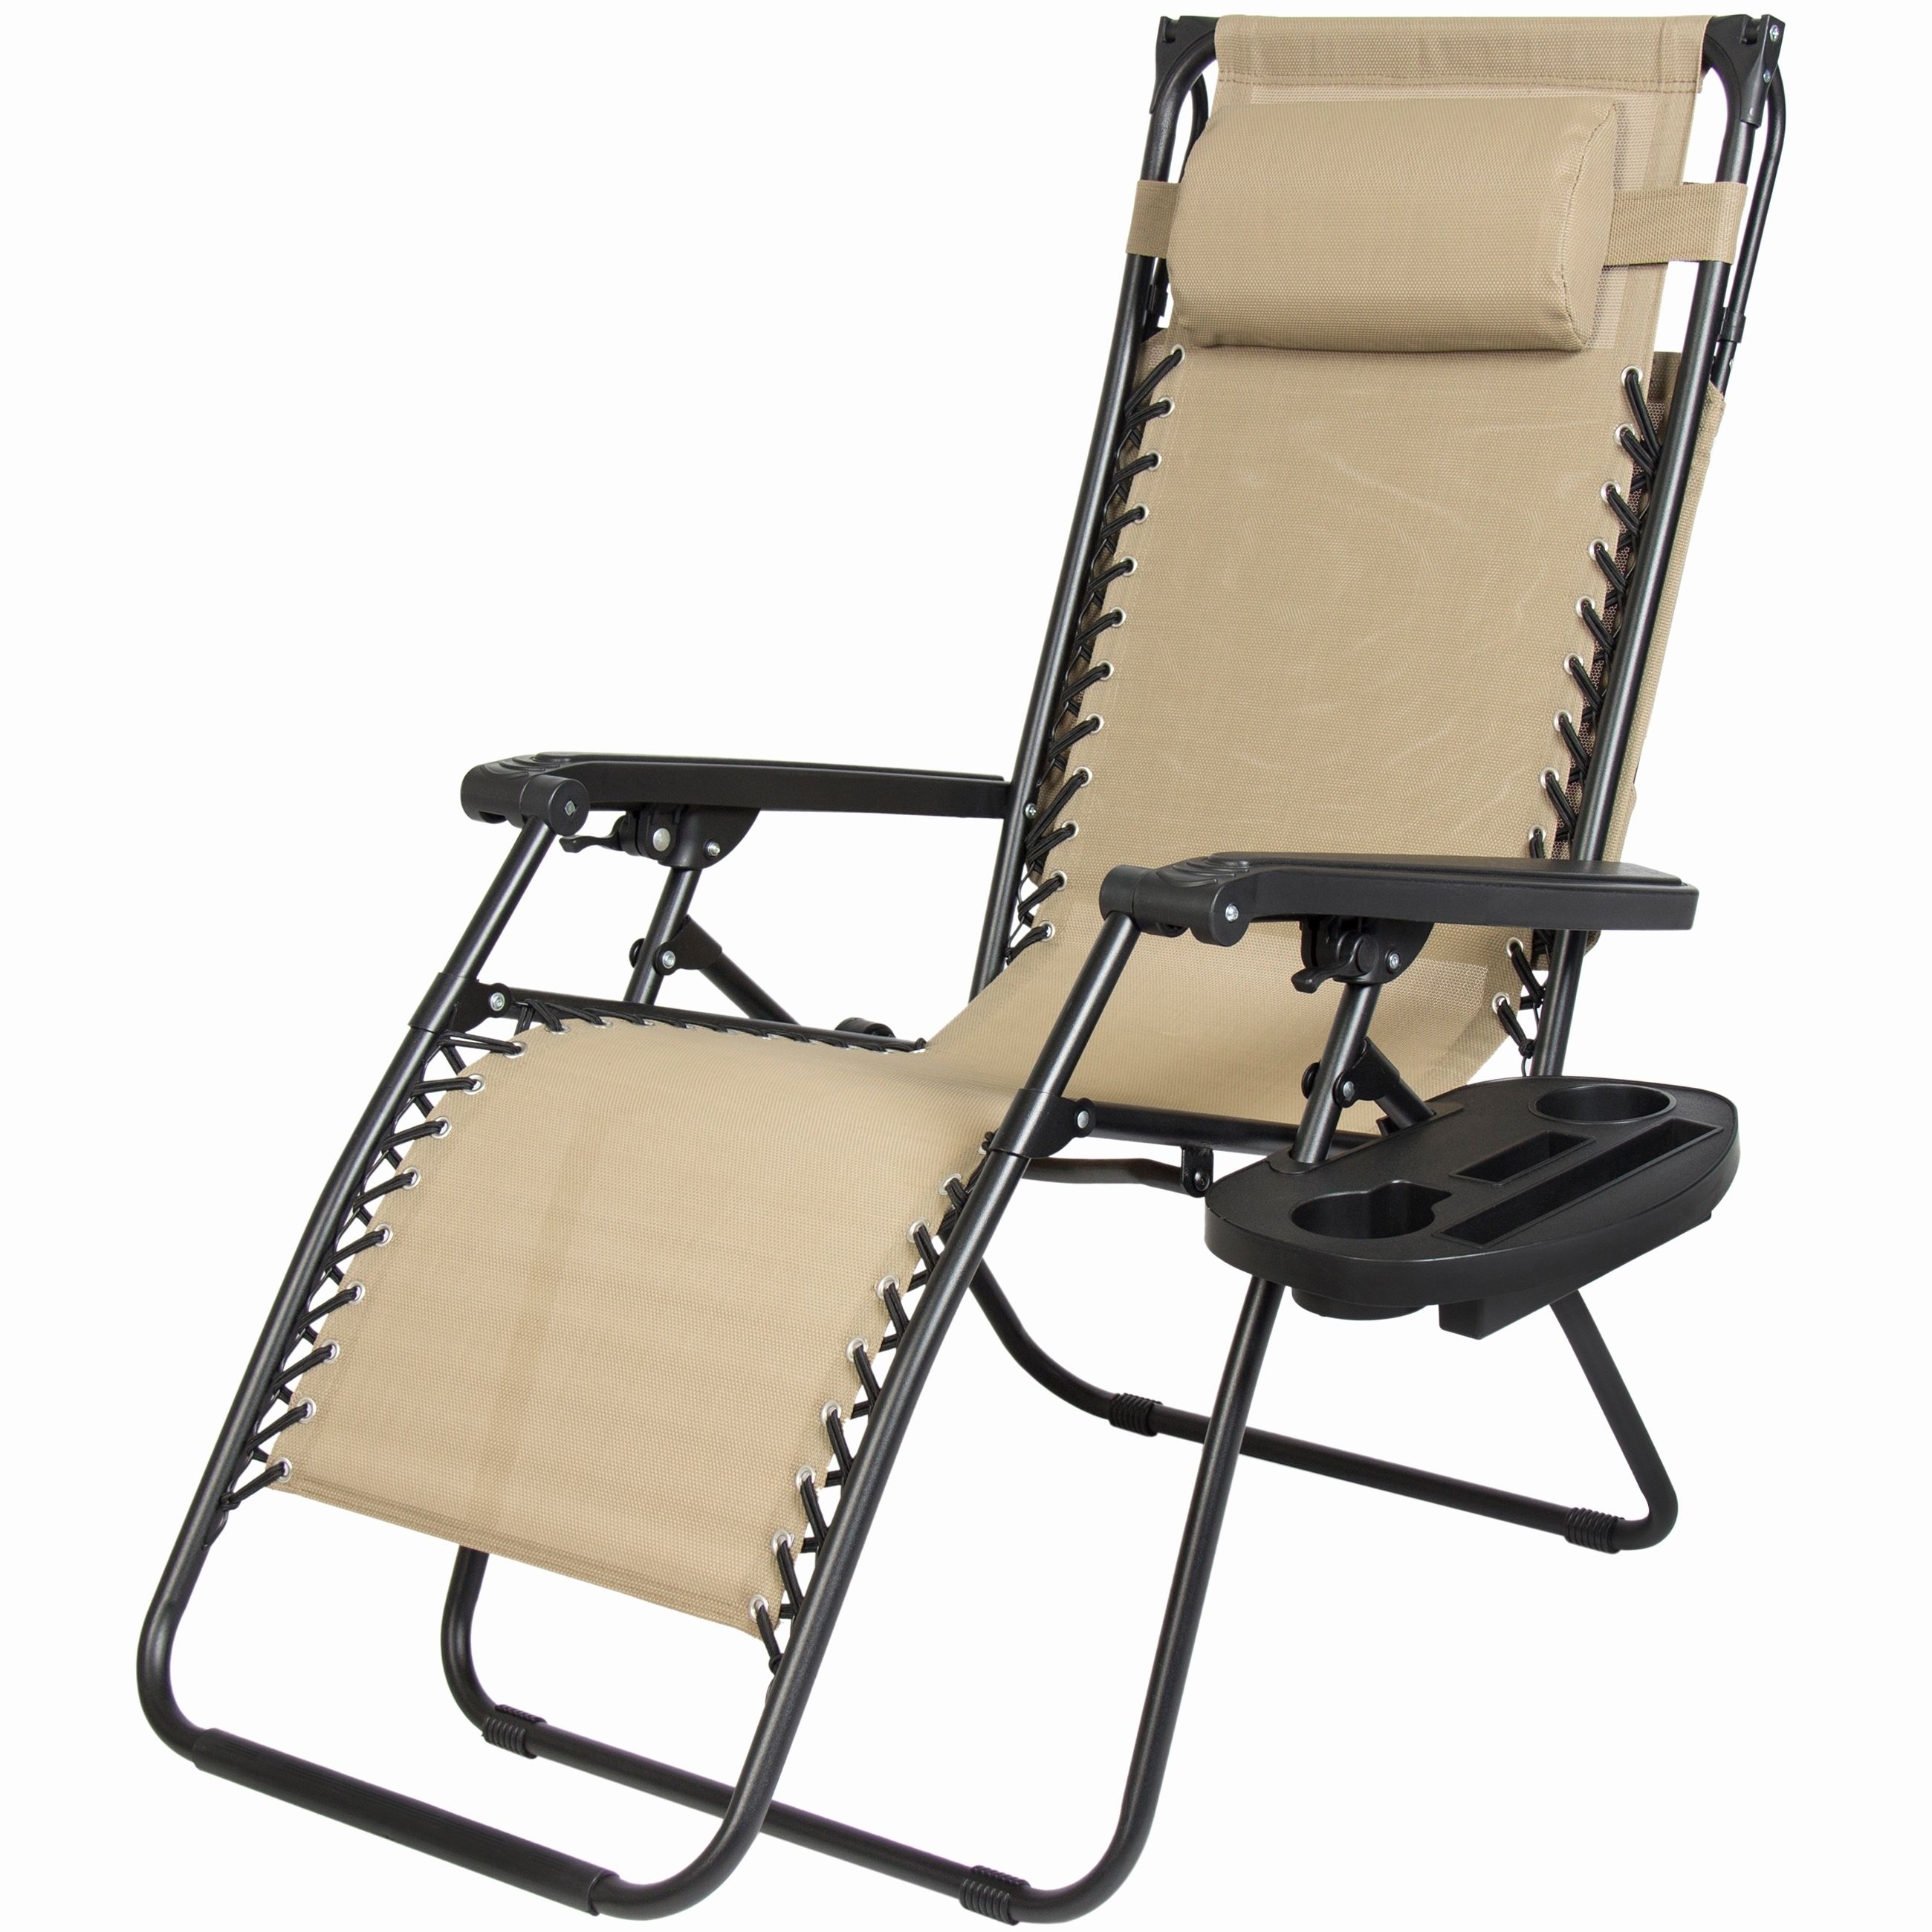 Target Outdoor Chaise Lounges In 2017 Outdoor : Folding Outdoor Lounge Chairs Outdoor Double Chaise (View 6 of 15)